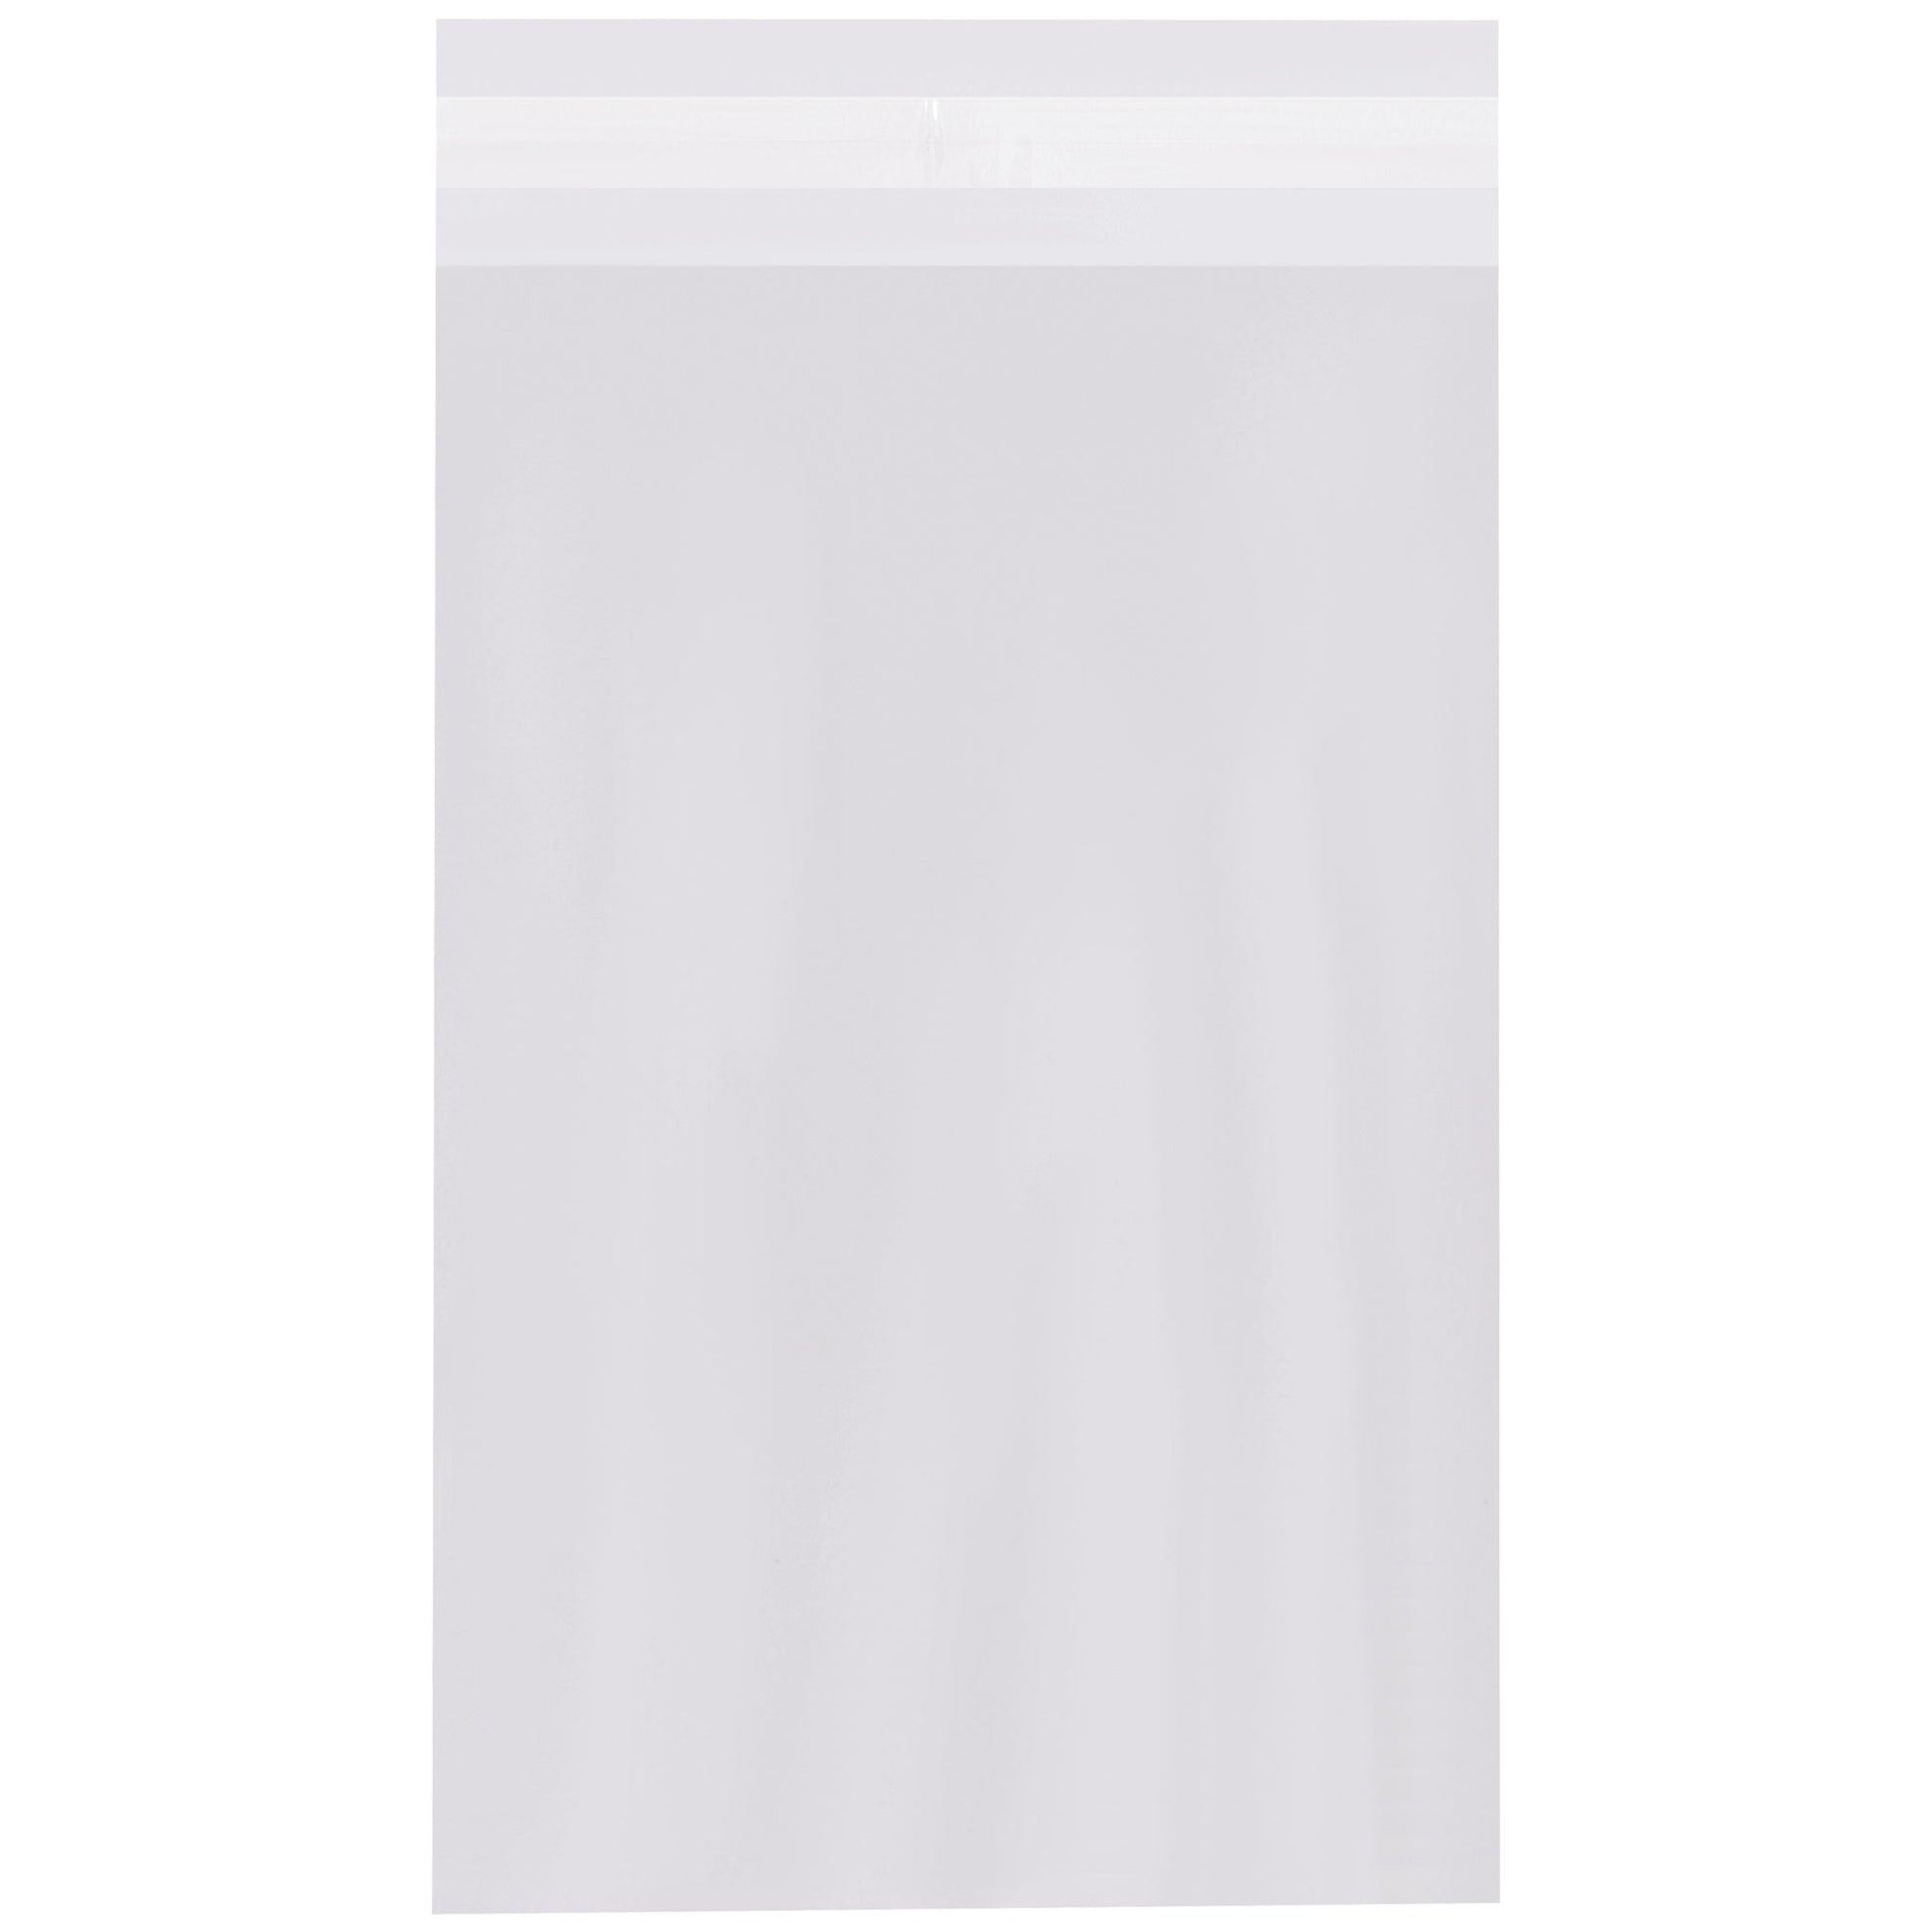 6 x 9" - 1.5 Mil Resealable Poly Bags - PRR060915